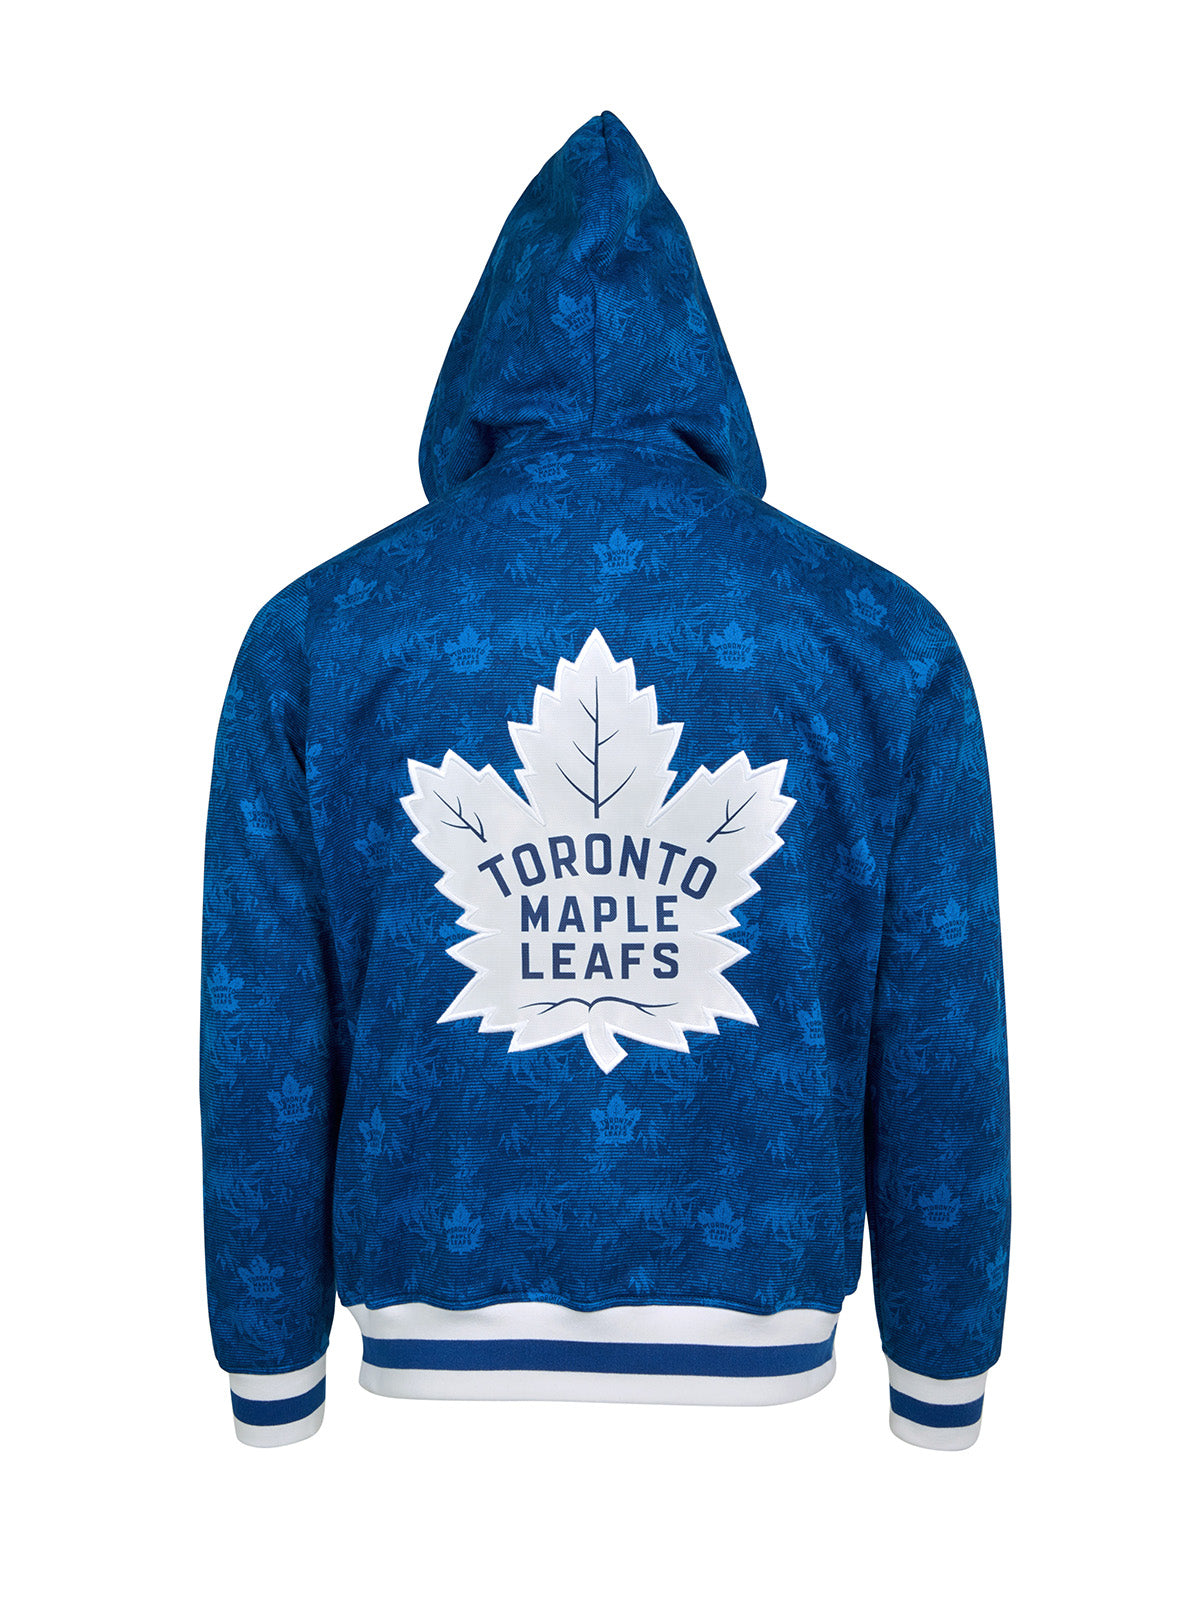 Toronto Maple Leafs Hoodie - Show your team spirit, with the iconic team logo patch centered on the back, and proudly display your Toronto Maple Leafs support in their team colors with this NHL hockey hoodie.